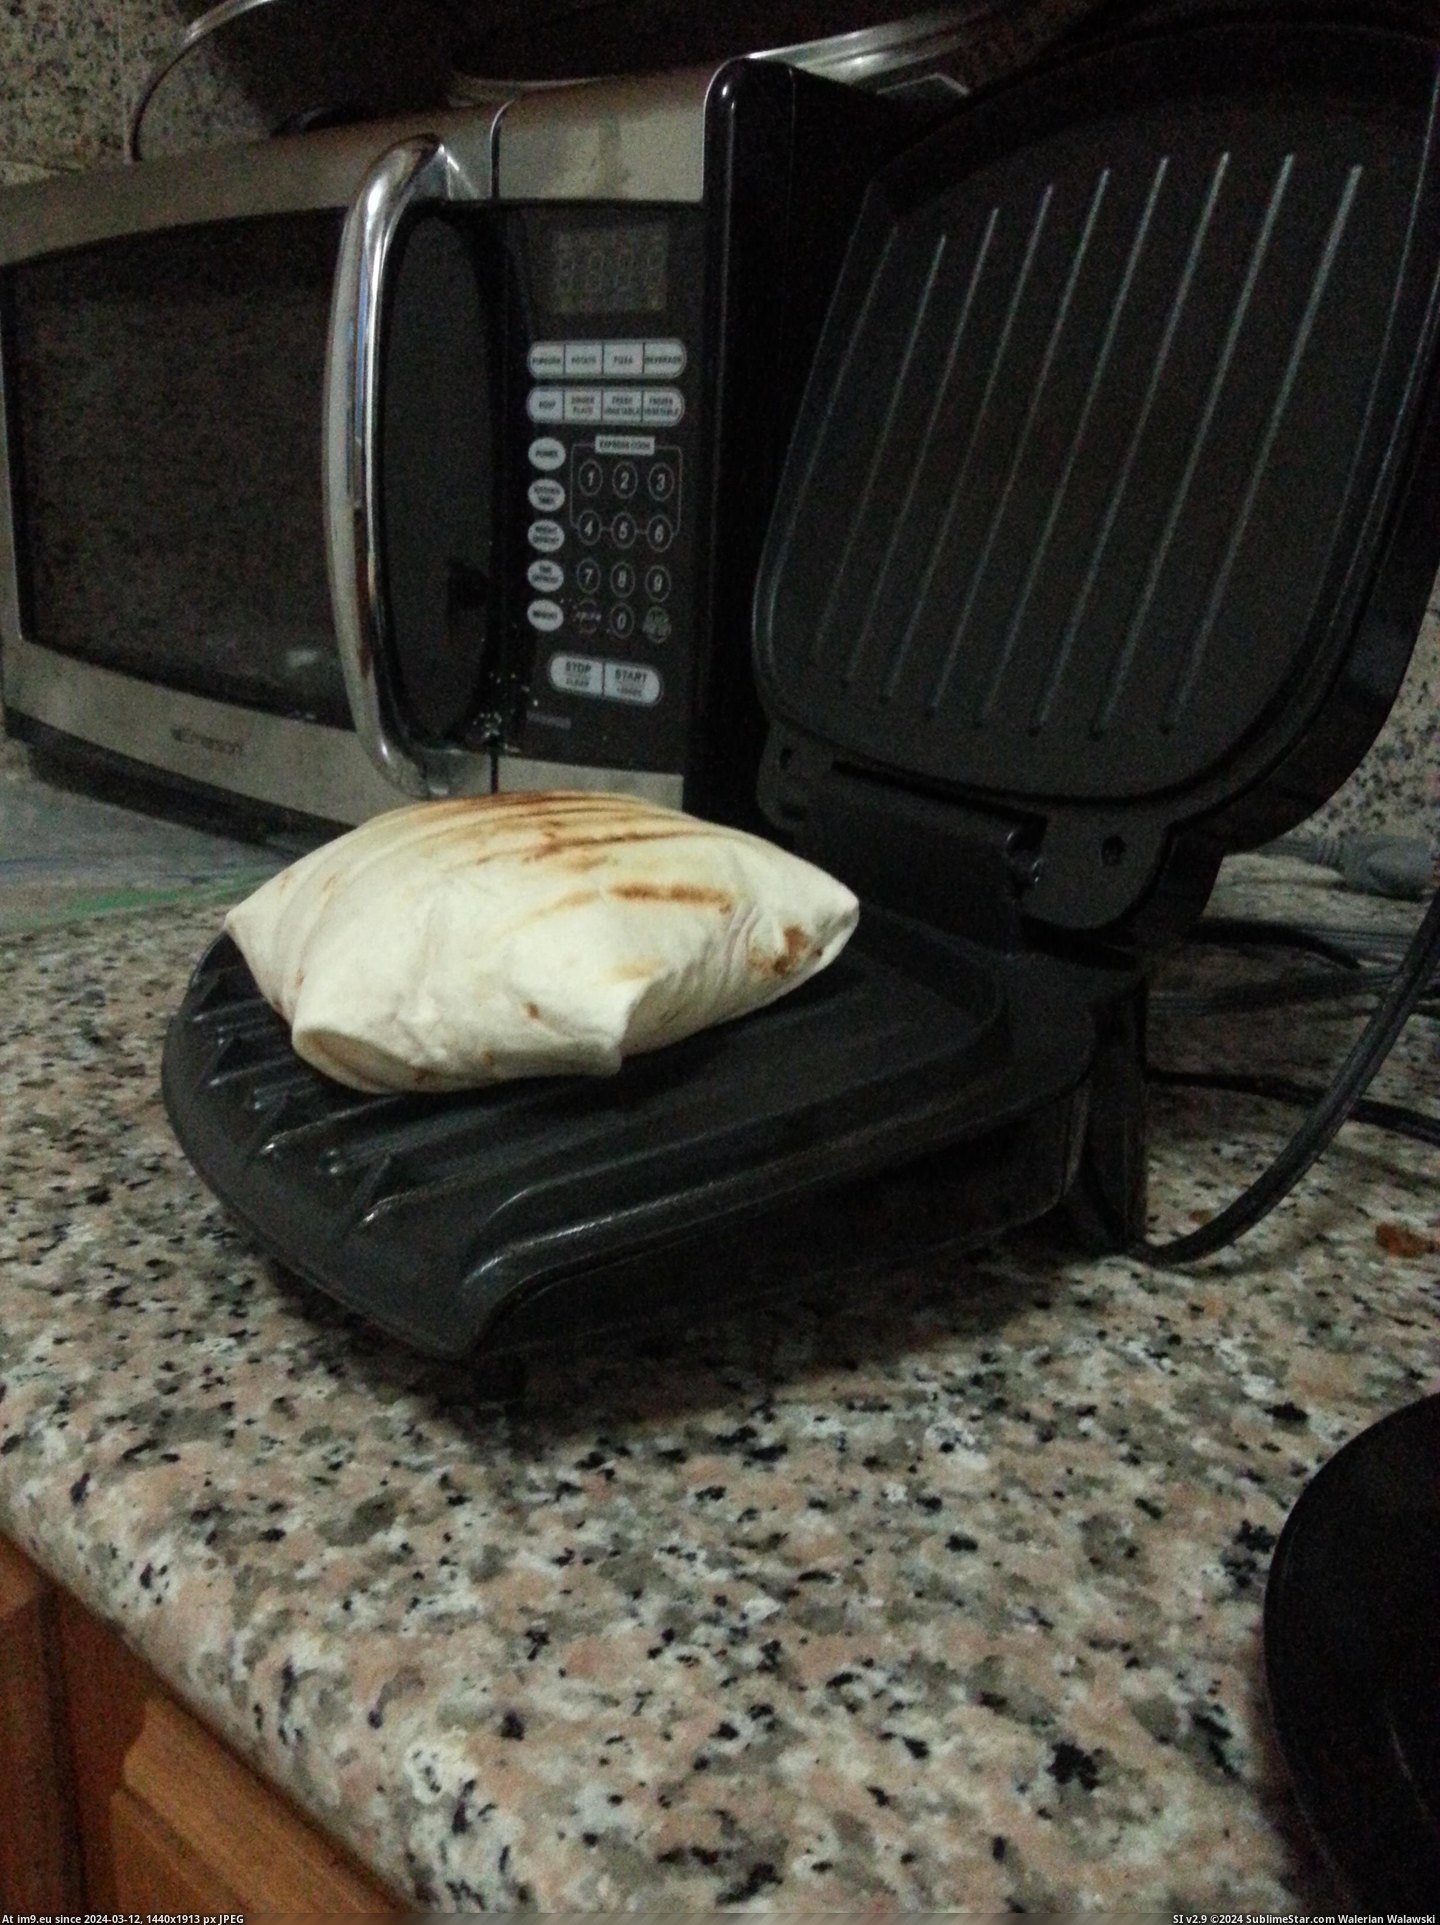 #Too #Air #Any #Inflated #Crac #Expanding #Quesadilla #Perfectly #Cheese #Folded [Mildlyinteresting] I made a quesadilla and folded it too perfectly. It inflated from air expanding and the cheese kept any crac Pic. (Obraz z album My r/MILDLYINTERESTING favs))